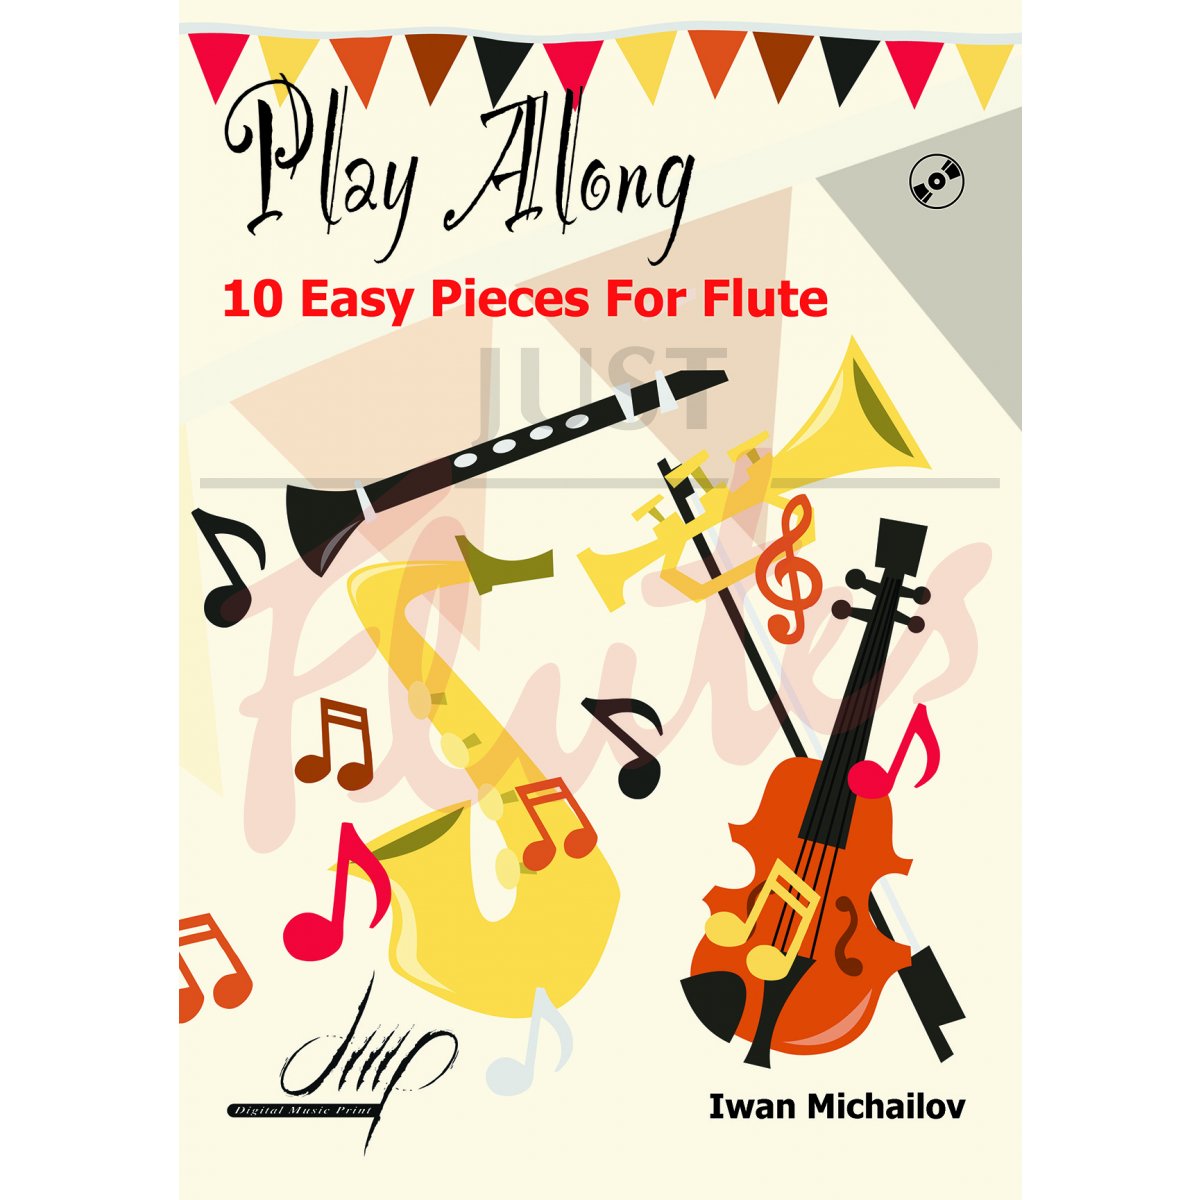 10 Easy Pieces for flute (play along)